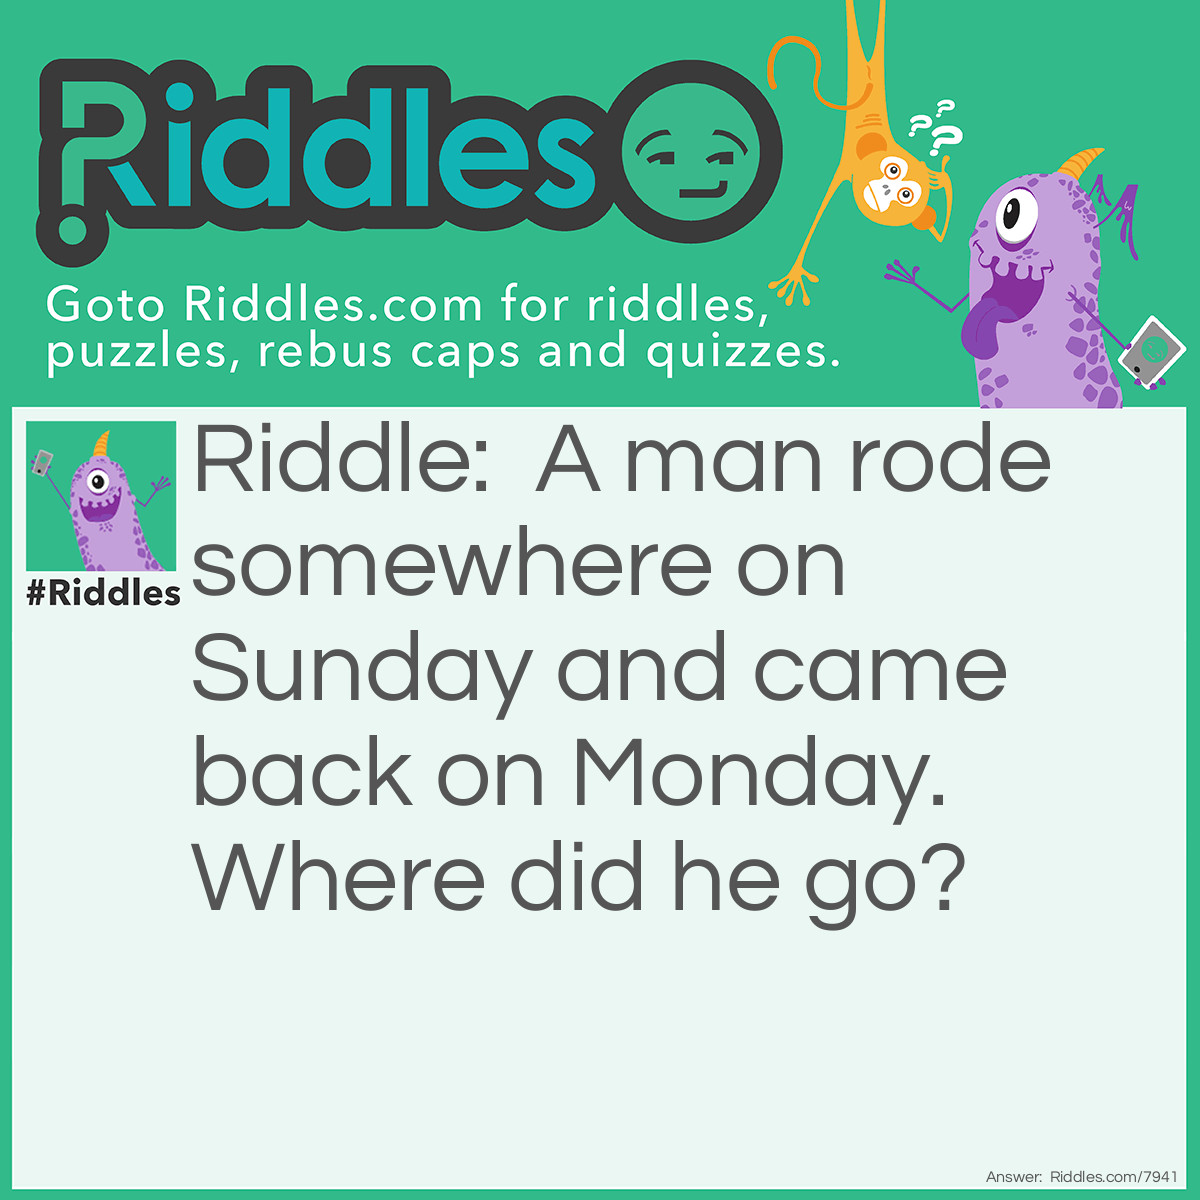 Riddle: A man rode somewhere on Sunday and came back on Monday. Where did he go? Answer: Las Vegas.